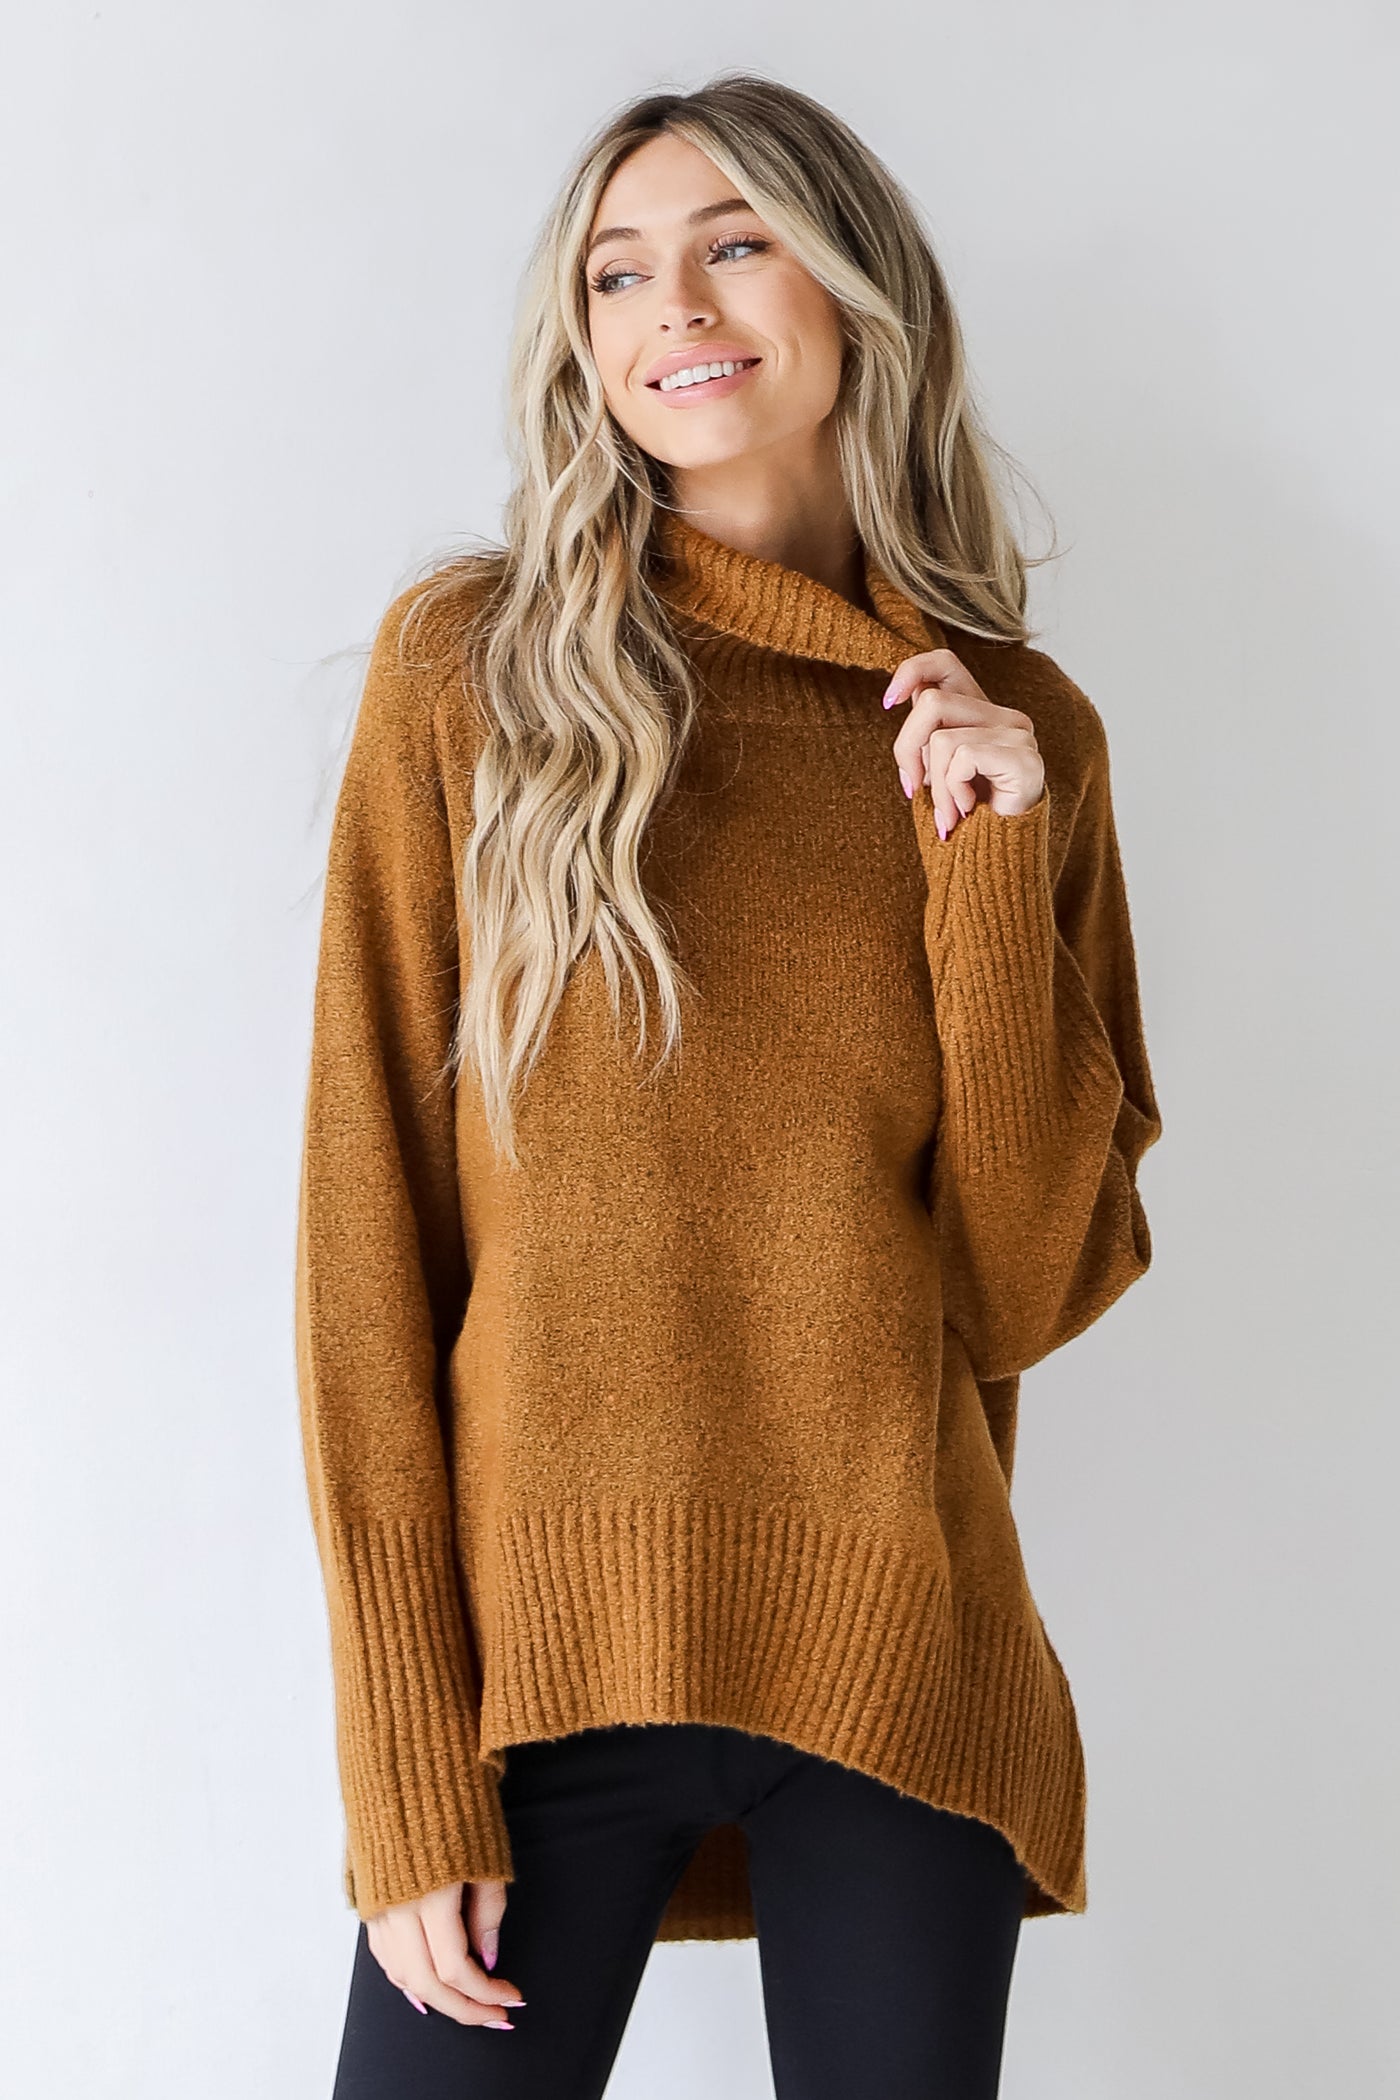 Turtleneck Sweater in camel front view